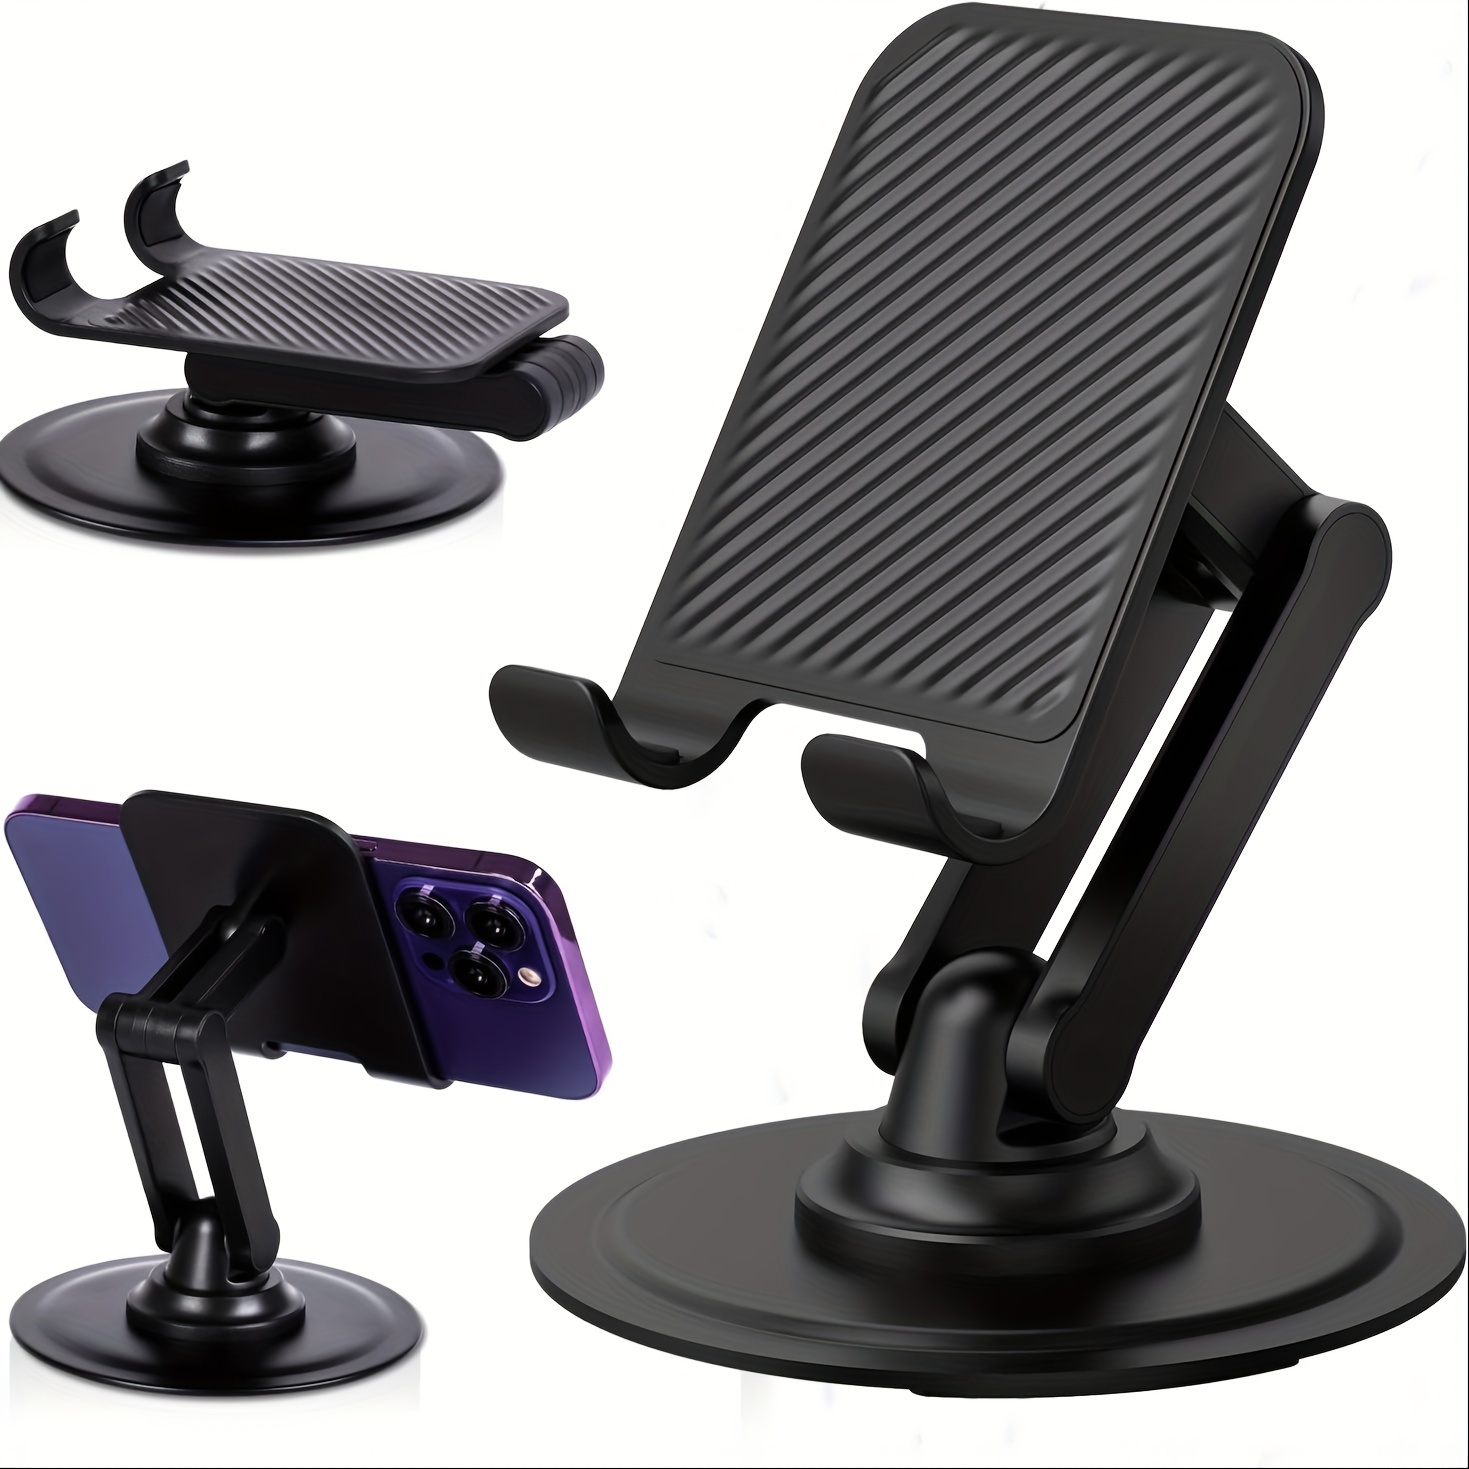 

Phone Holder, 360 ° Rotating Phone Holder, Adjustable Height And Angle Phone Holder, Suitable For Desktop, Portable, And Foldable Phone Holders